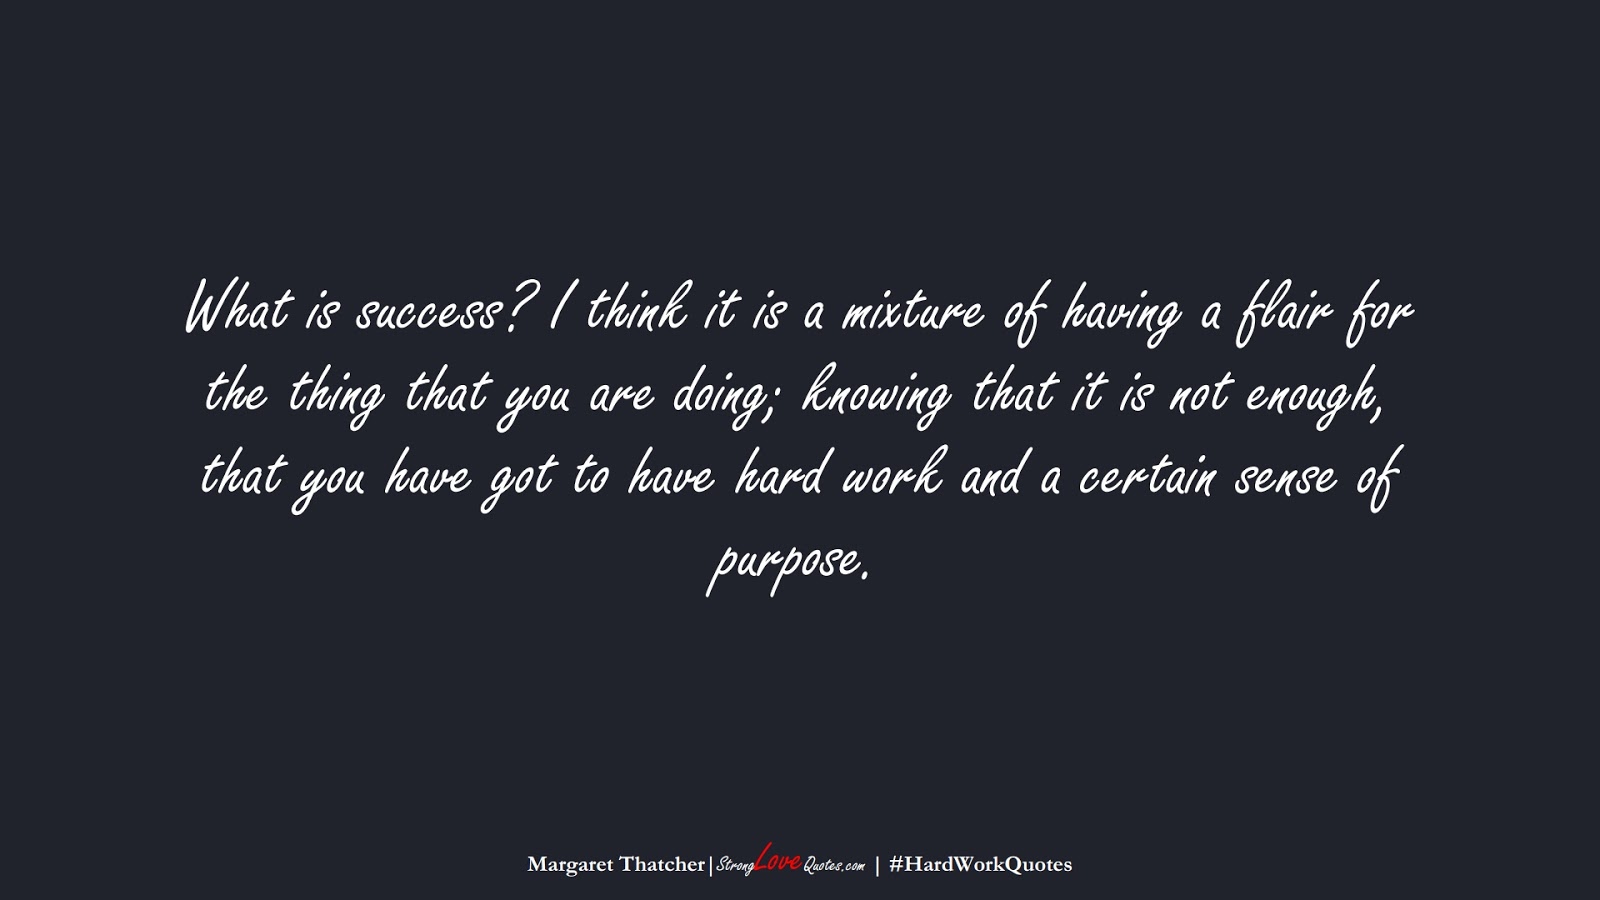 What is success? I think it is a mixture of having a flair for the thing that you are doing; knowing that it is not enough, that you have got to have hard work and a certain sense of purpose. (Margaret Thatcher);  #HardWorkQuotes